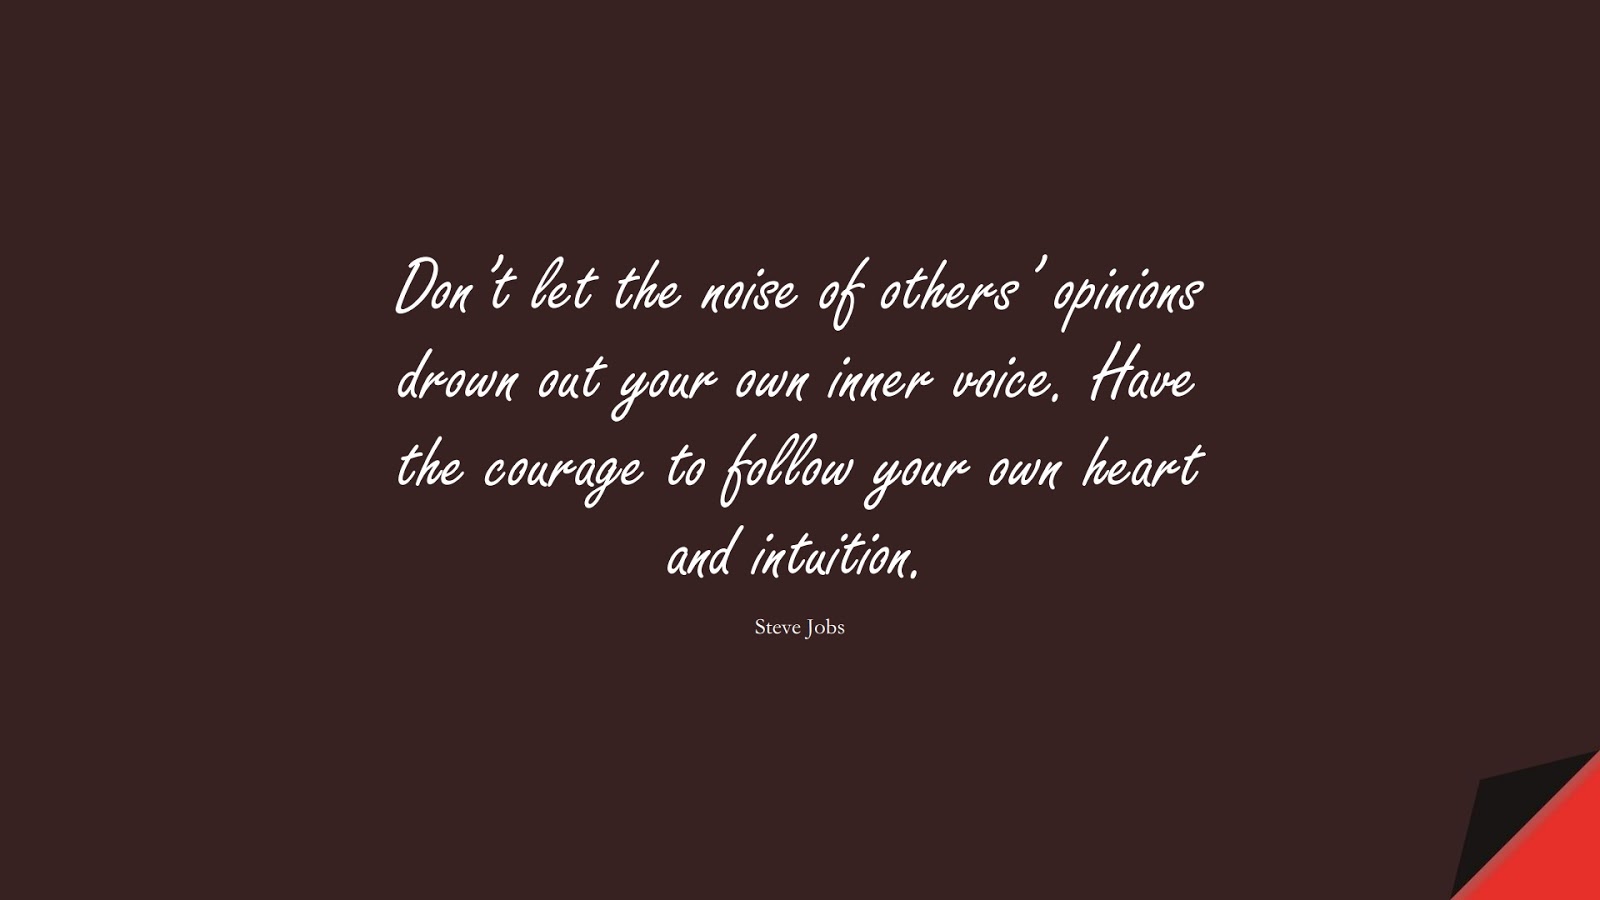 Don’t let the noise of others’ opinions drown out your own inner voice. Have the courage to follow your own heart and intuition. (Steve Jobs);  #CourageQuotes